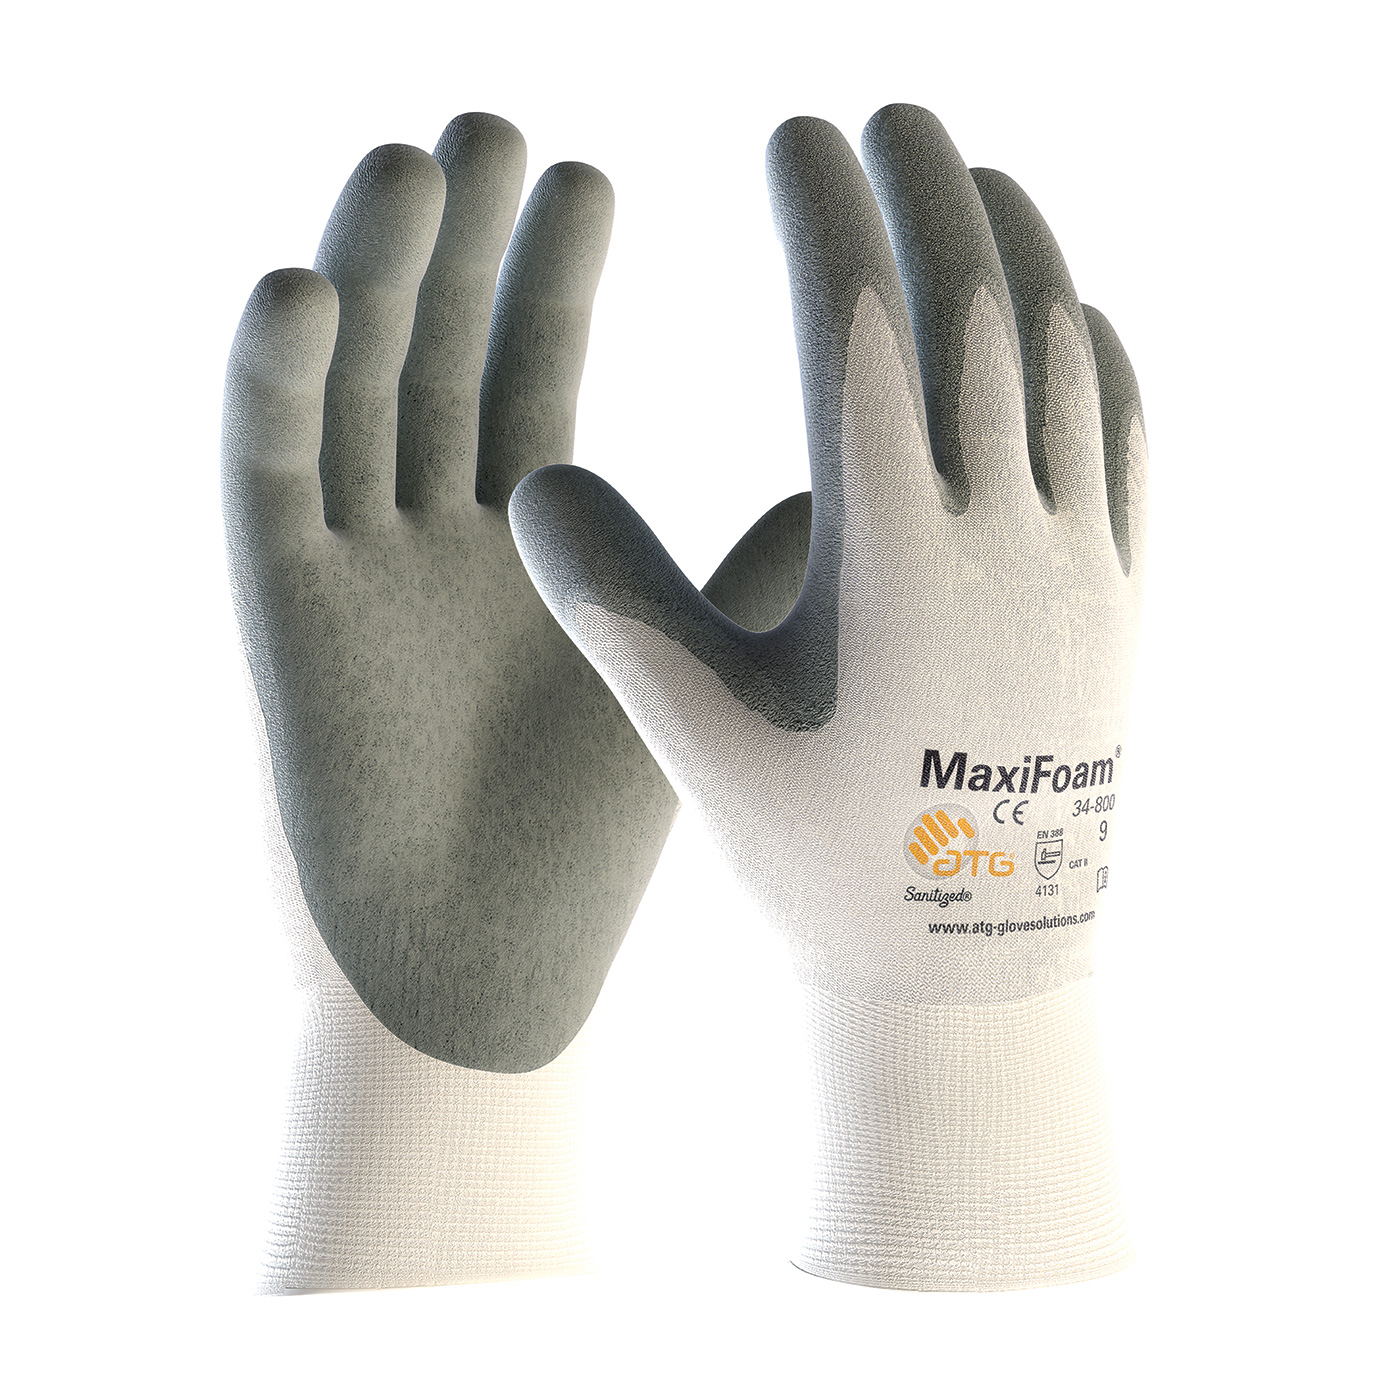 PIP 34-800/L MaxiFoam Premium Eeamless Knit Nylon Glove with Nitrile Coated Foam Grip on Palm & Fingers - Large PID-34 800 L